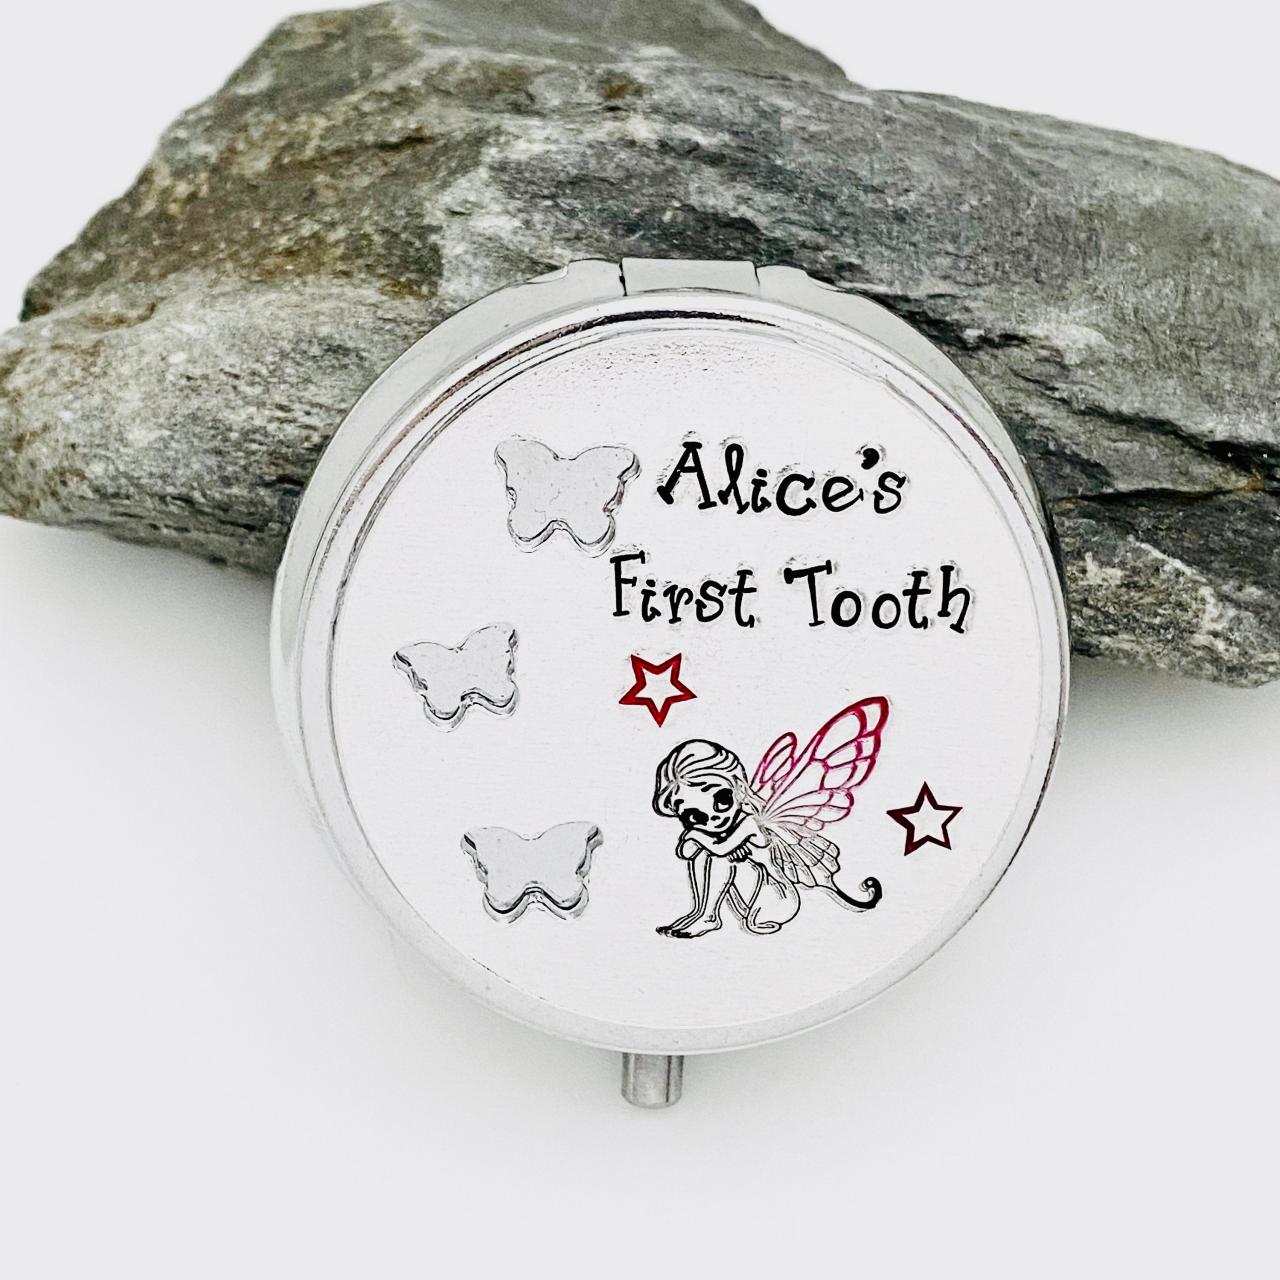 First Tooth Keepsake Box, Personalised Trinket Box, Baby's First Tooth Gift, Gift For New Baby, Baby Shower Present, Christening Gift